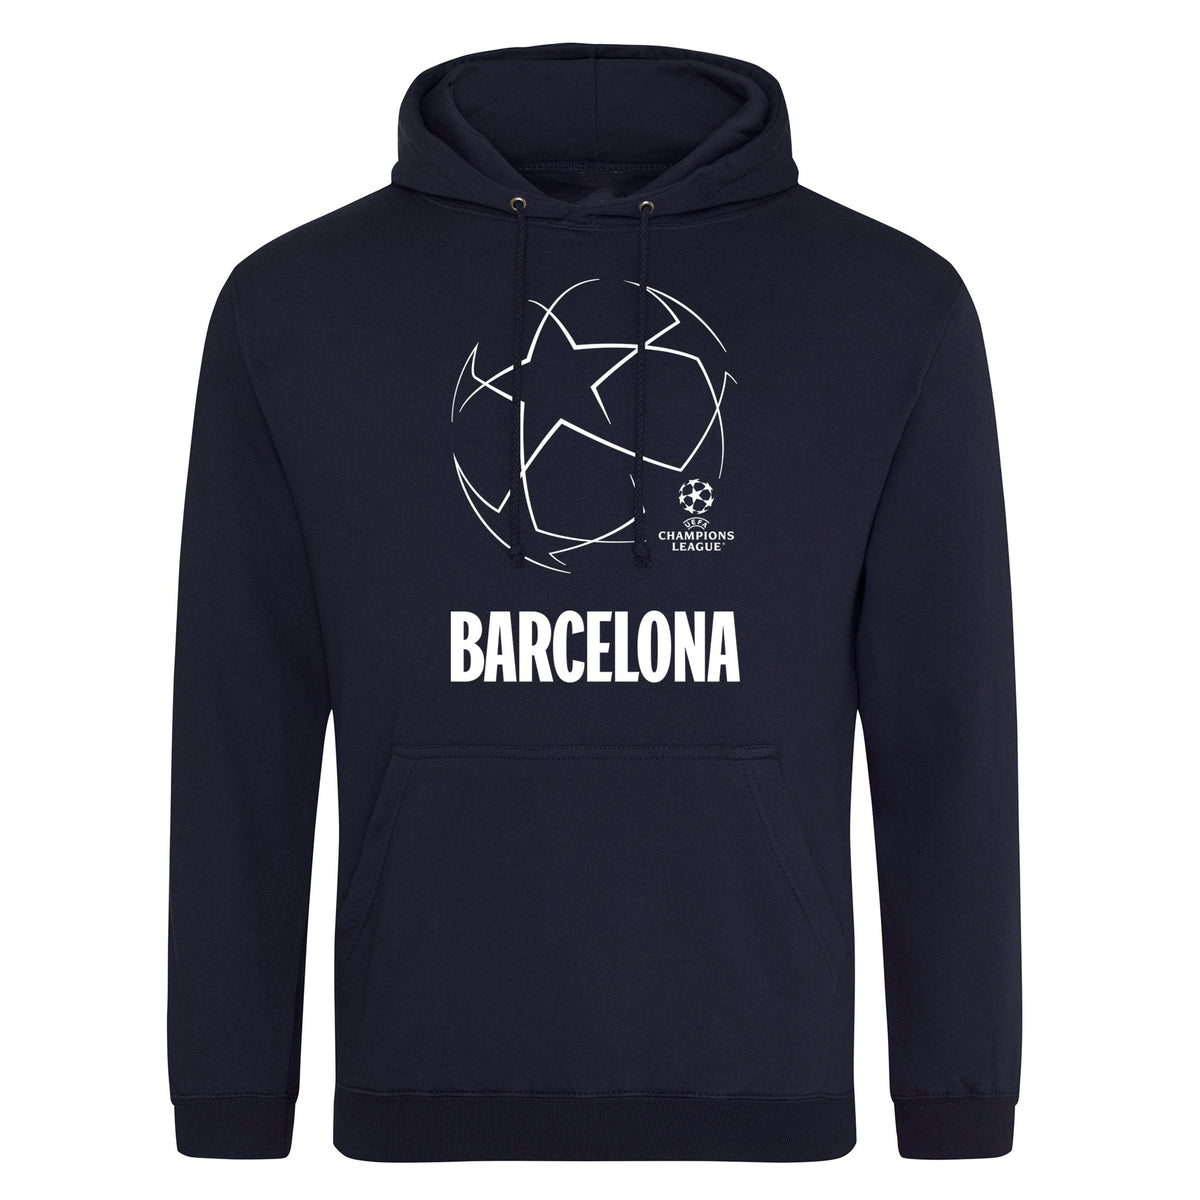 Champions League Starball Barcelona City Hoodie Navy